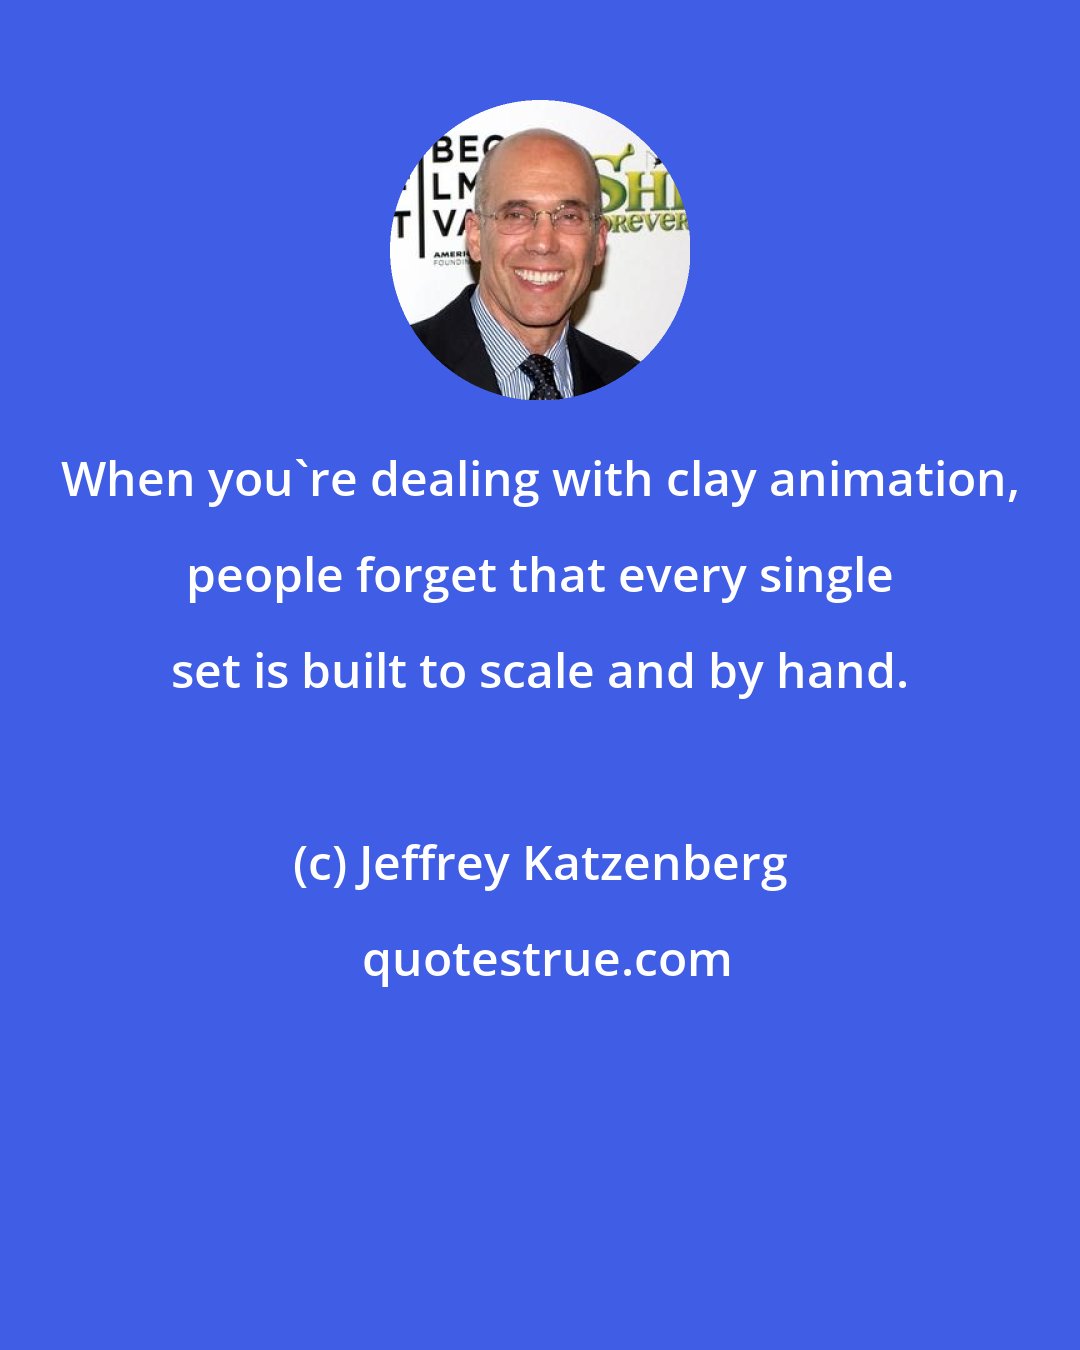 Jeffrey Katzenberg: When you're dealing with clay animation, people forget that every single set is built to scale and by hand.